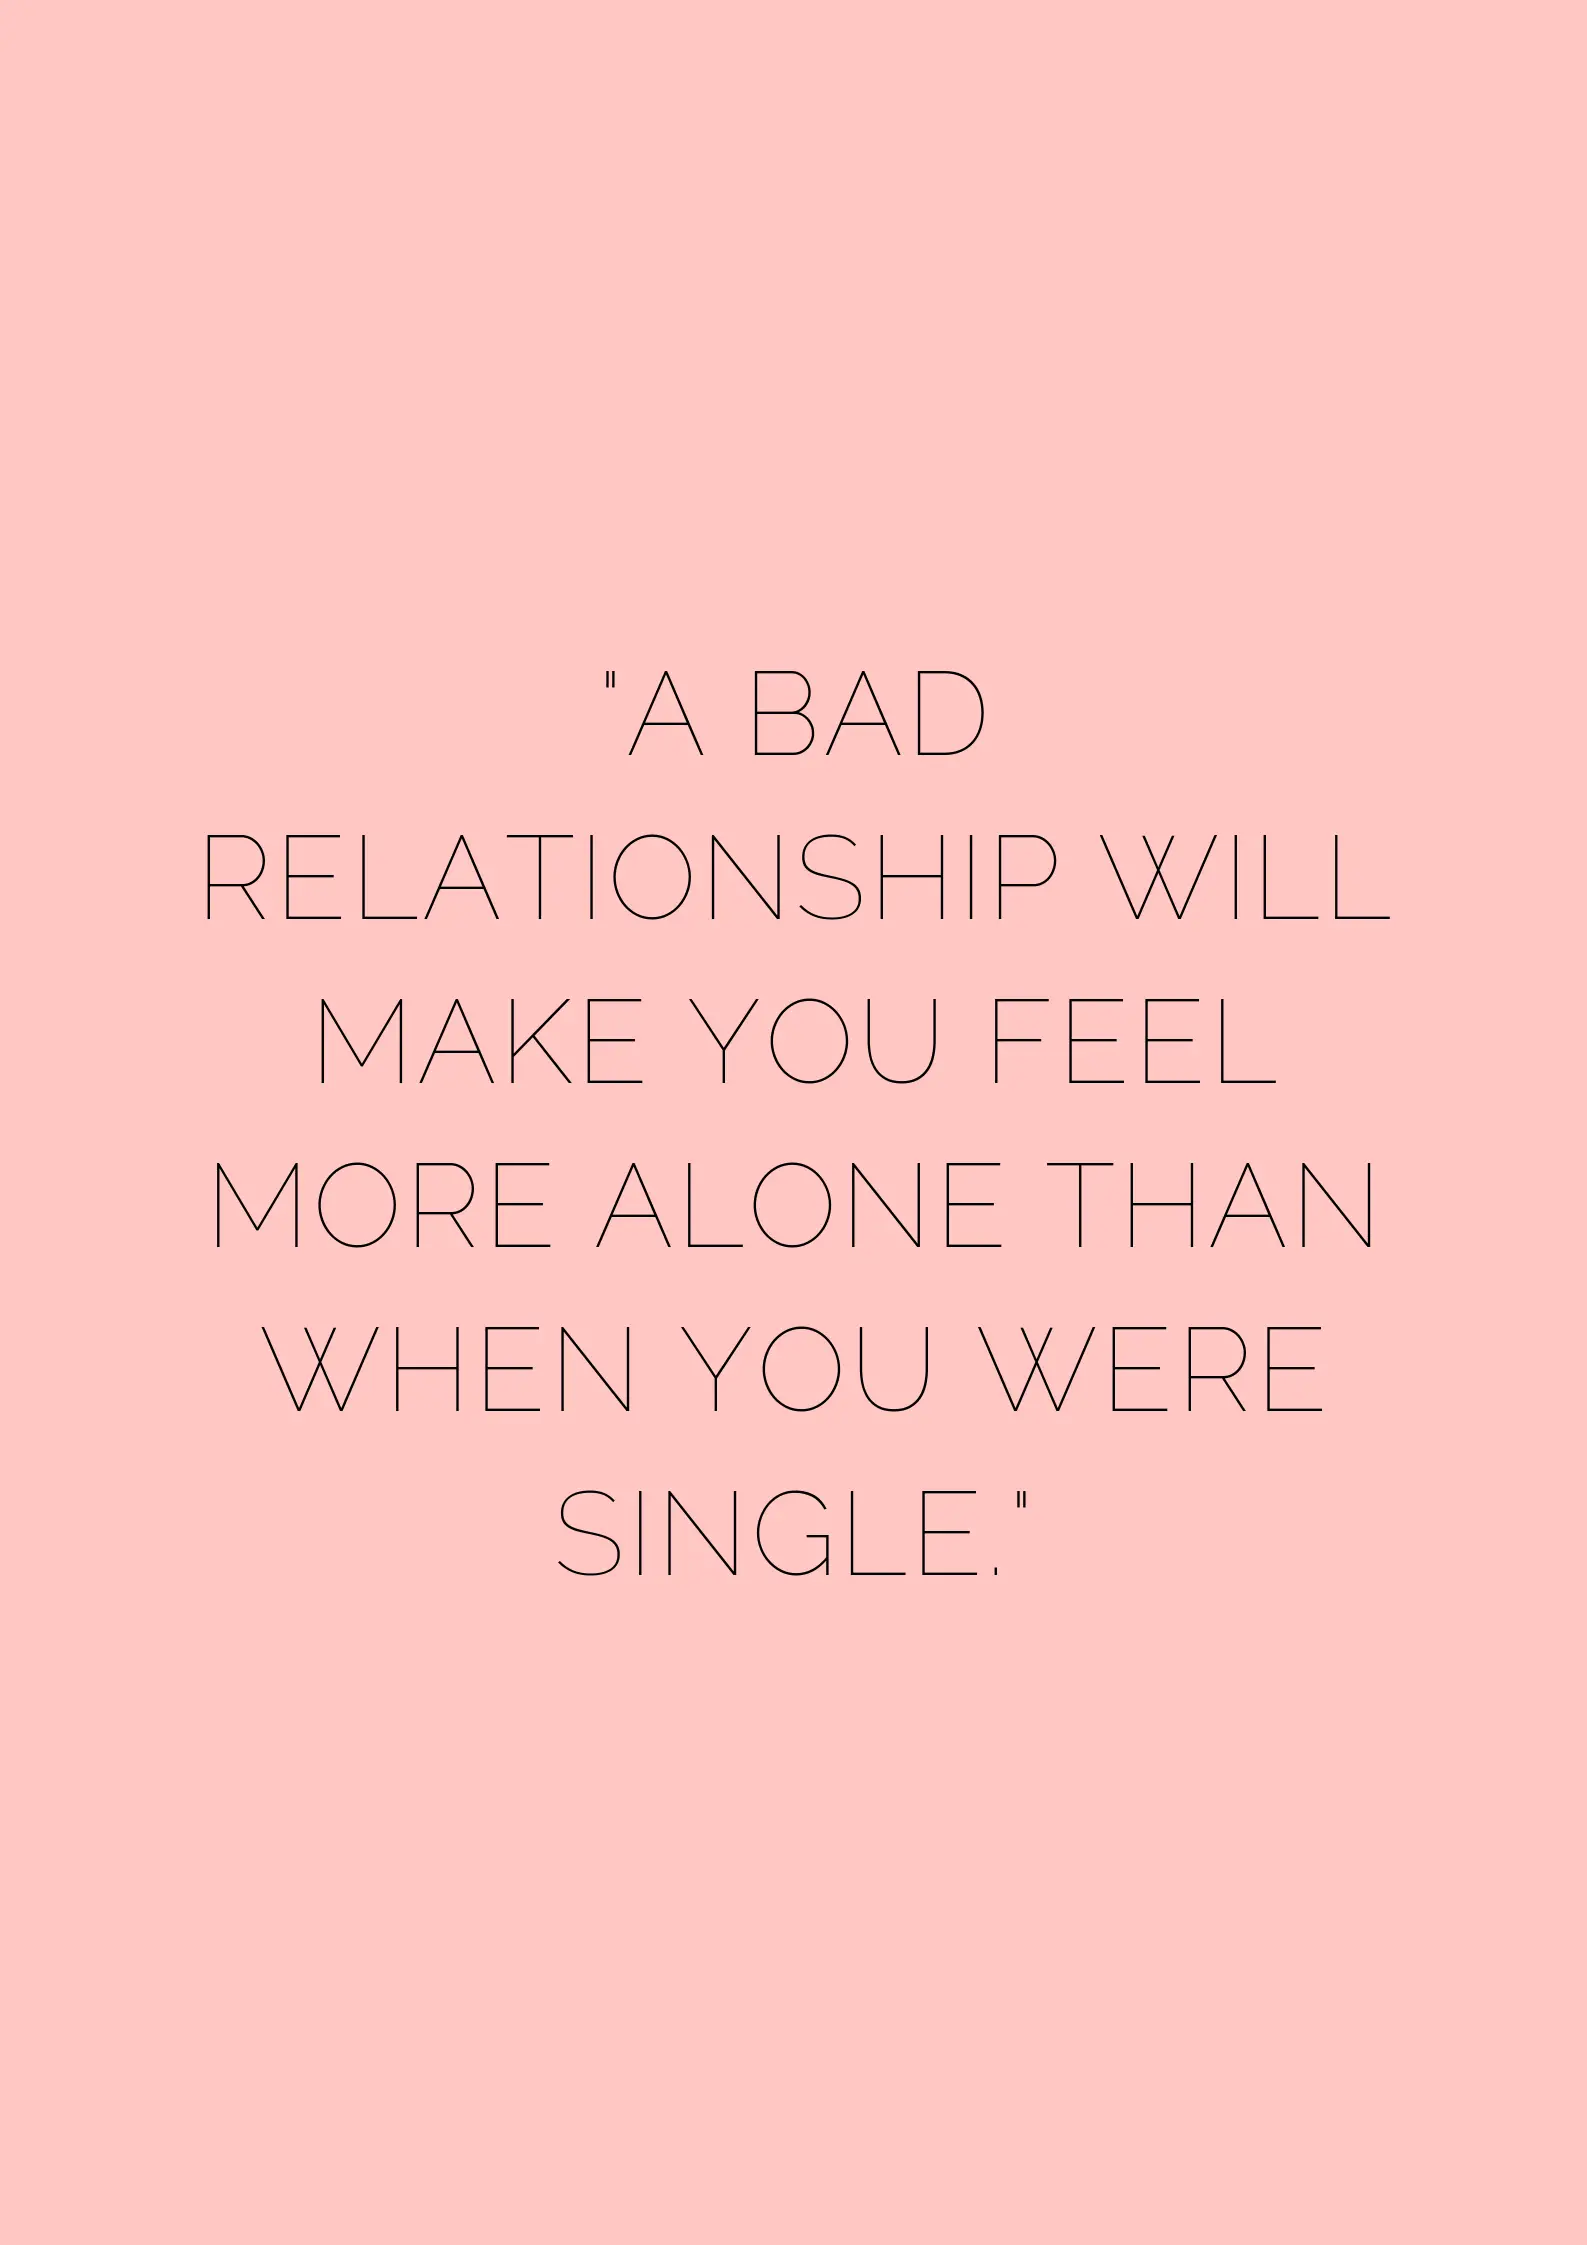 A BAD RELATIONSHIP - museuly